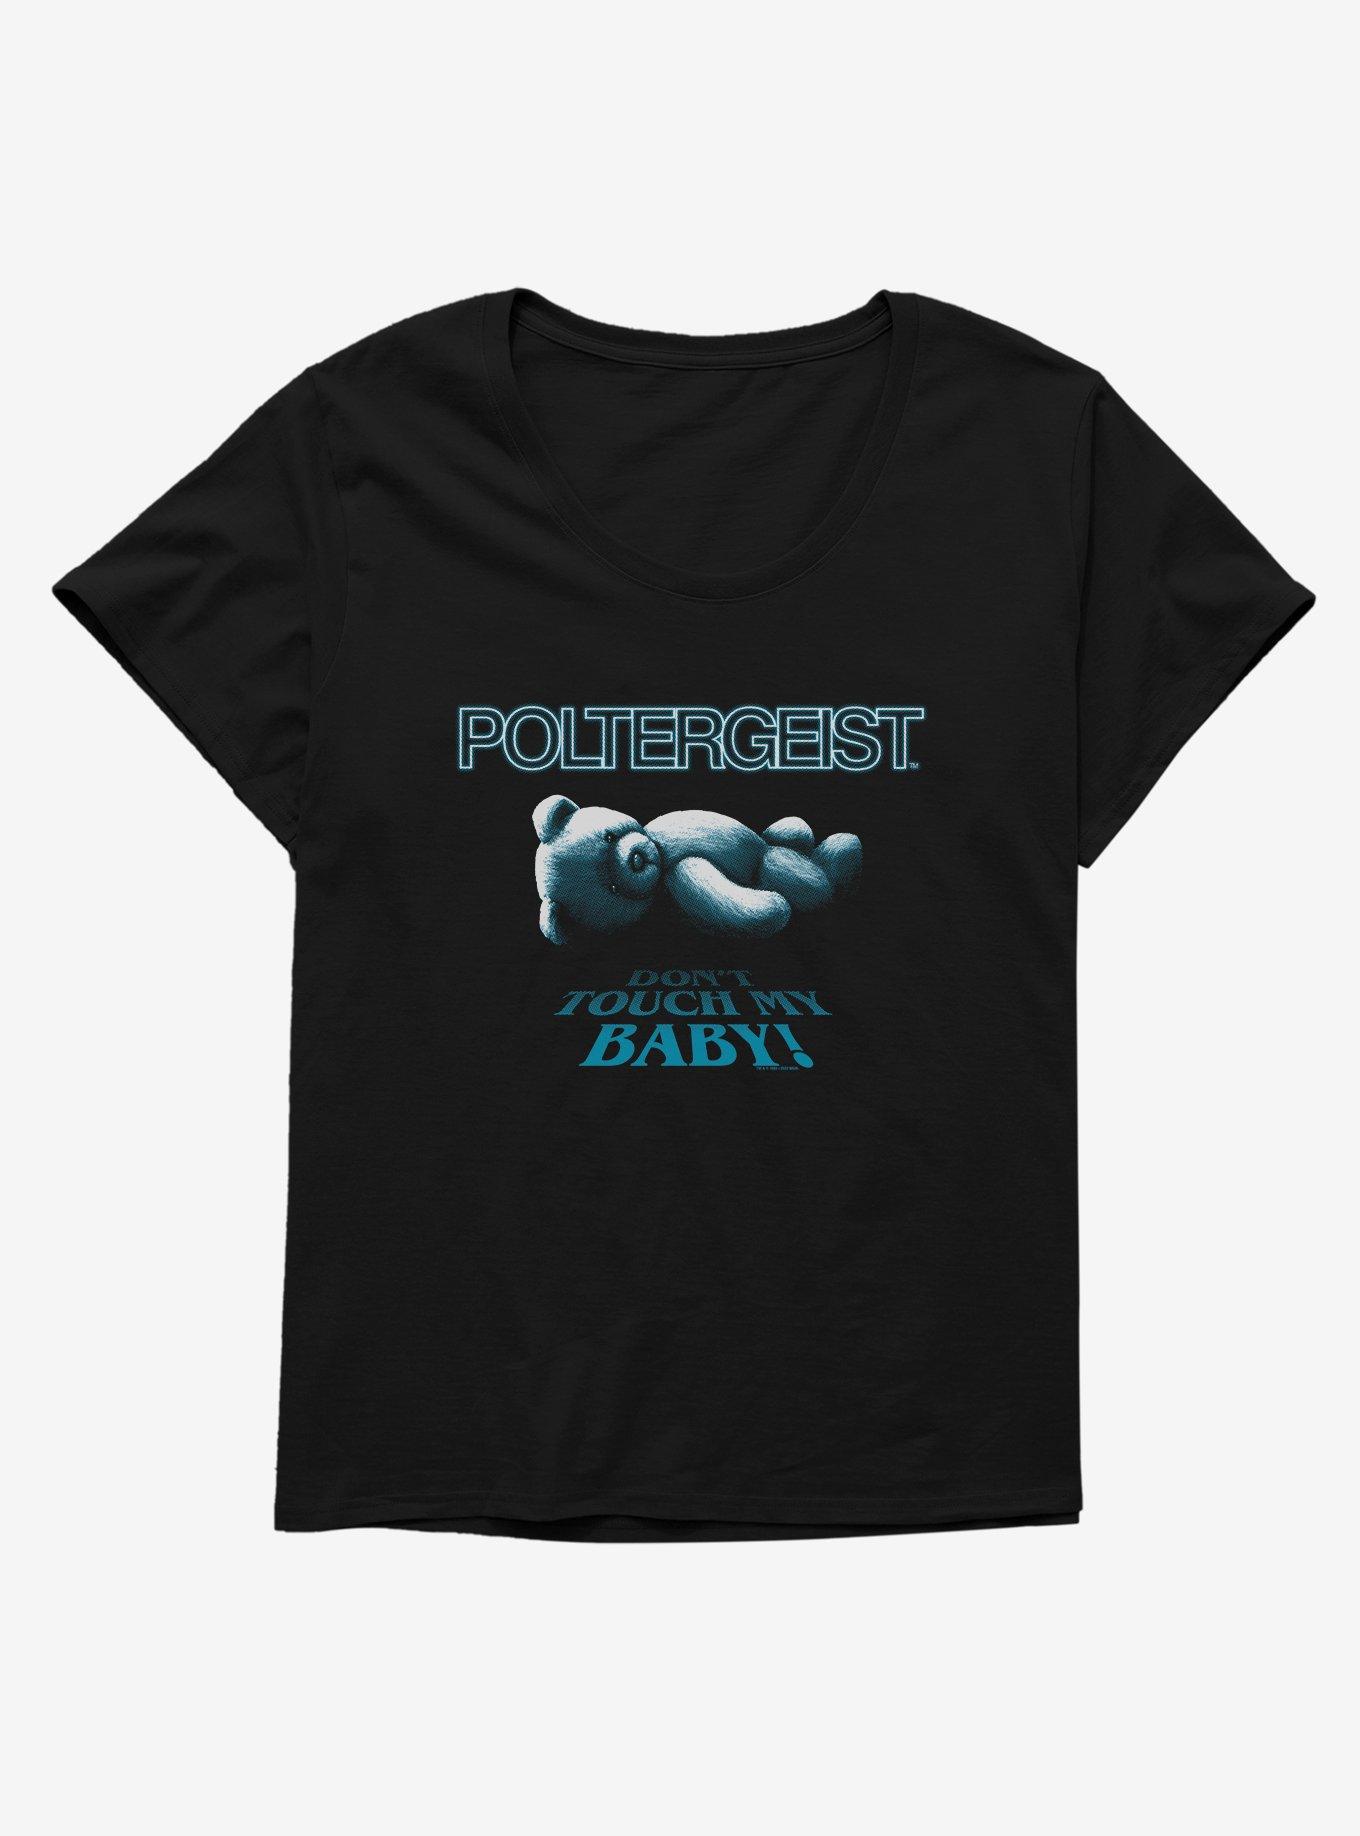 Poltergeist Don't Touch My Baby! Girls T-Shirt Plus Size, BLACK, hi-res